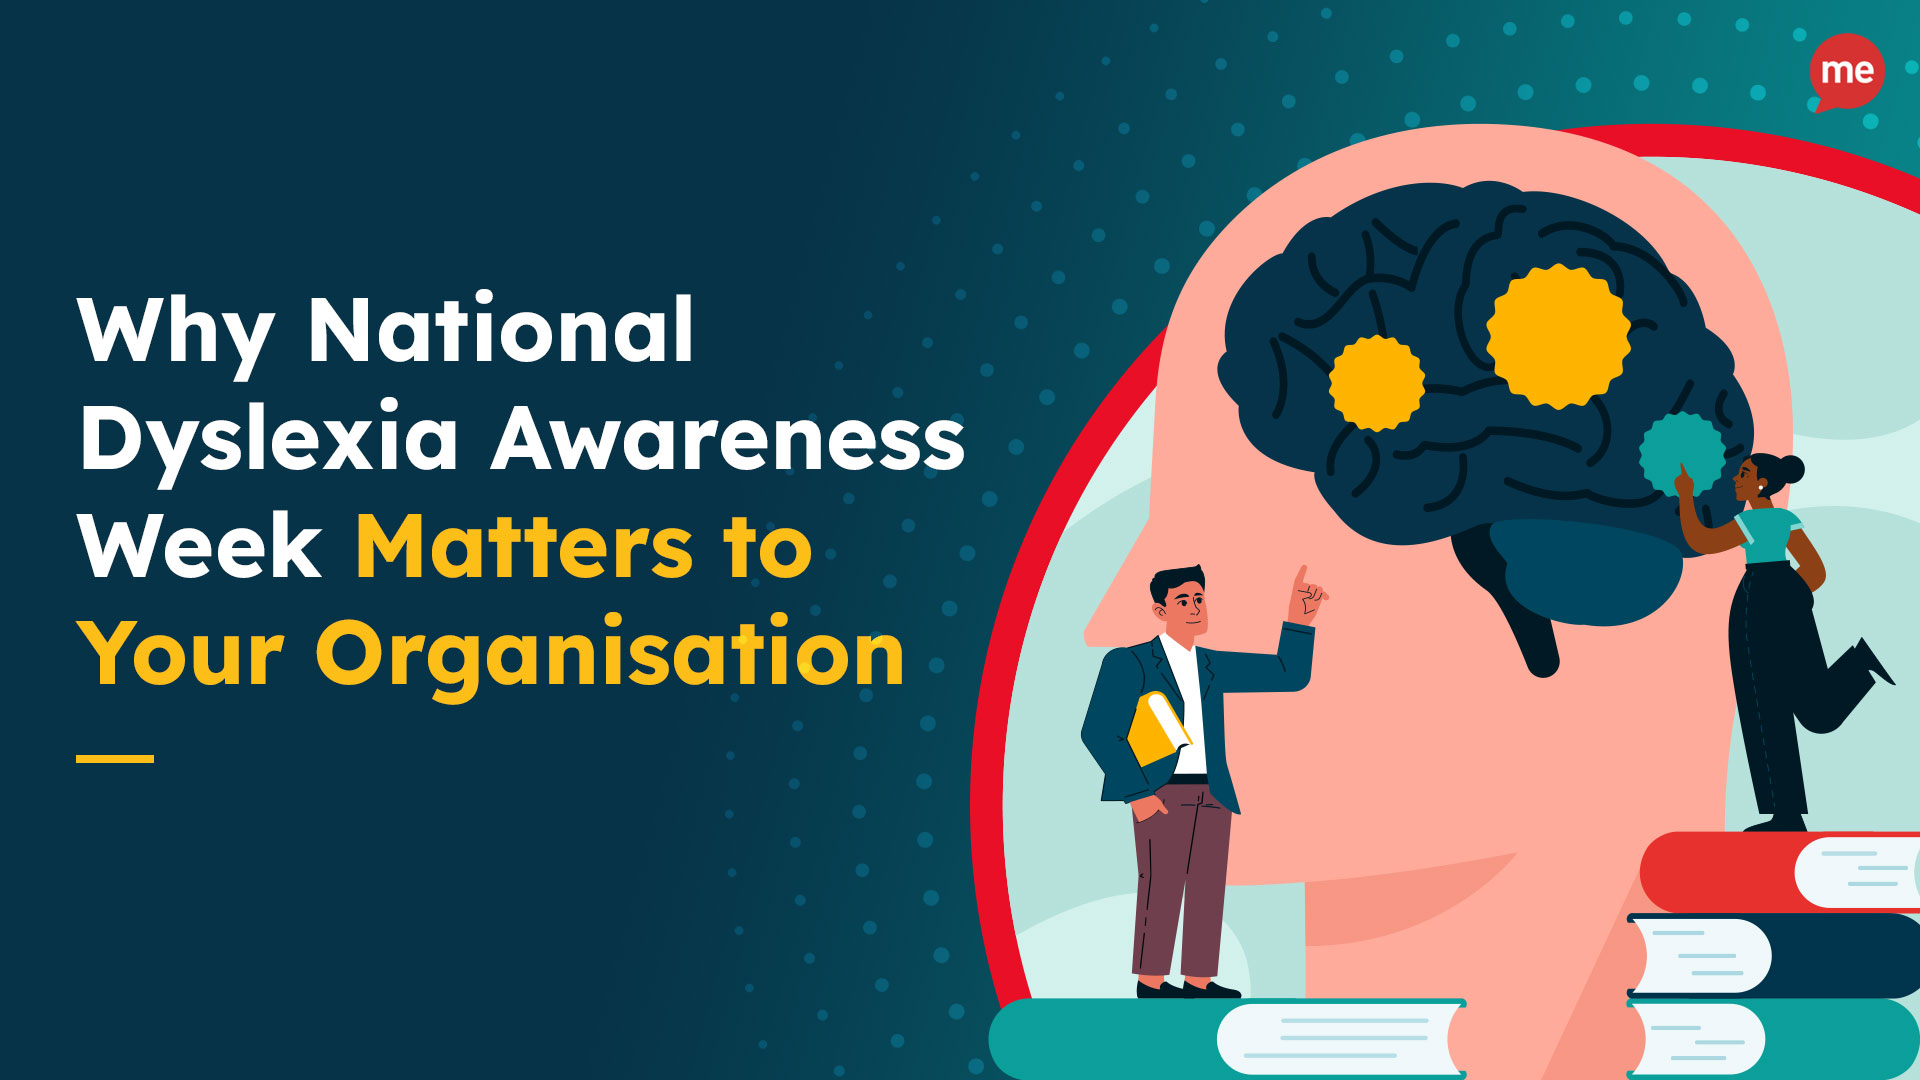 Why National Dyslexia Awareness Week Matters to Your Organisation